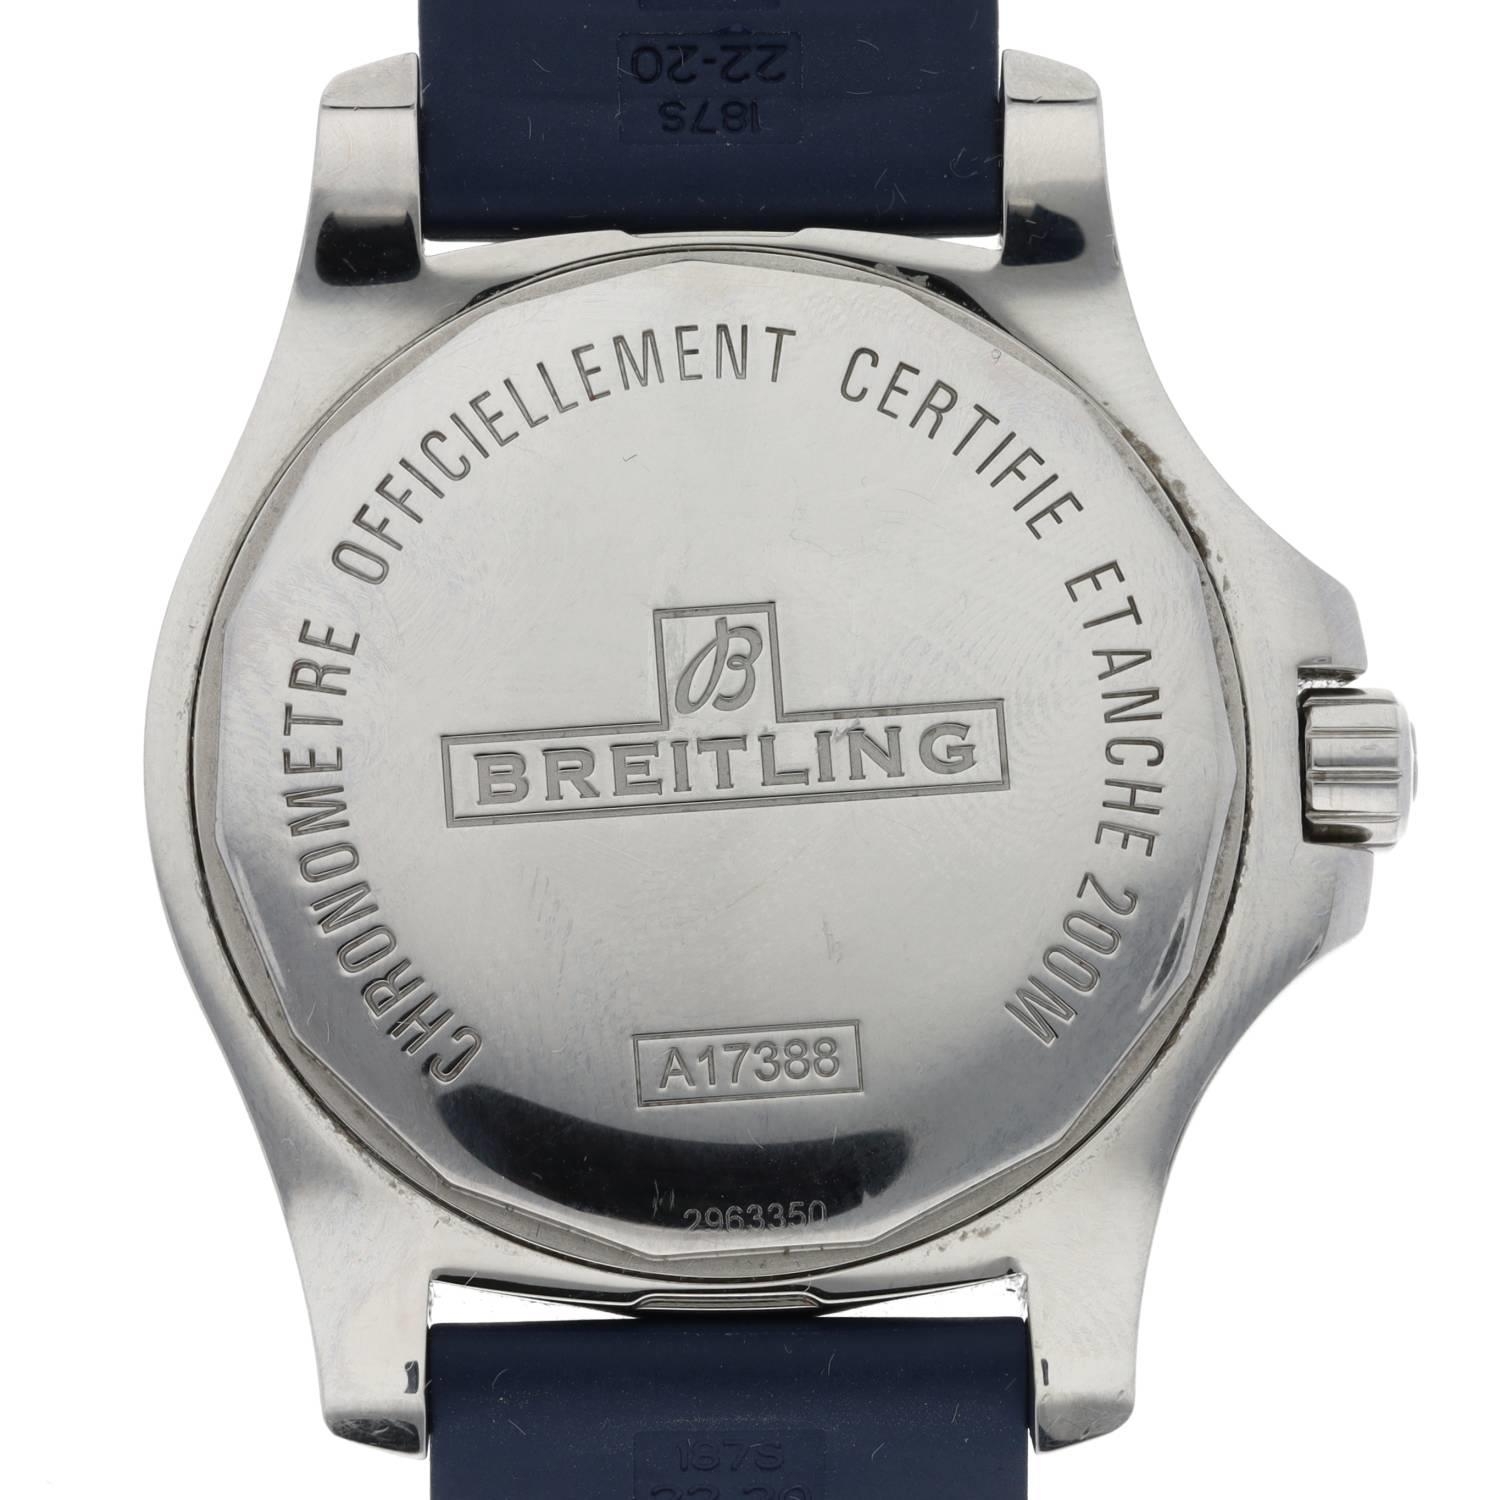 Breitling Colt Chronometre automatic stainless steel gentleman's wristwatch, reference no. A17388, - Image 2 of 2